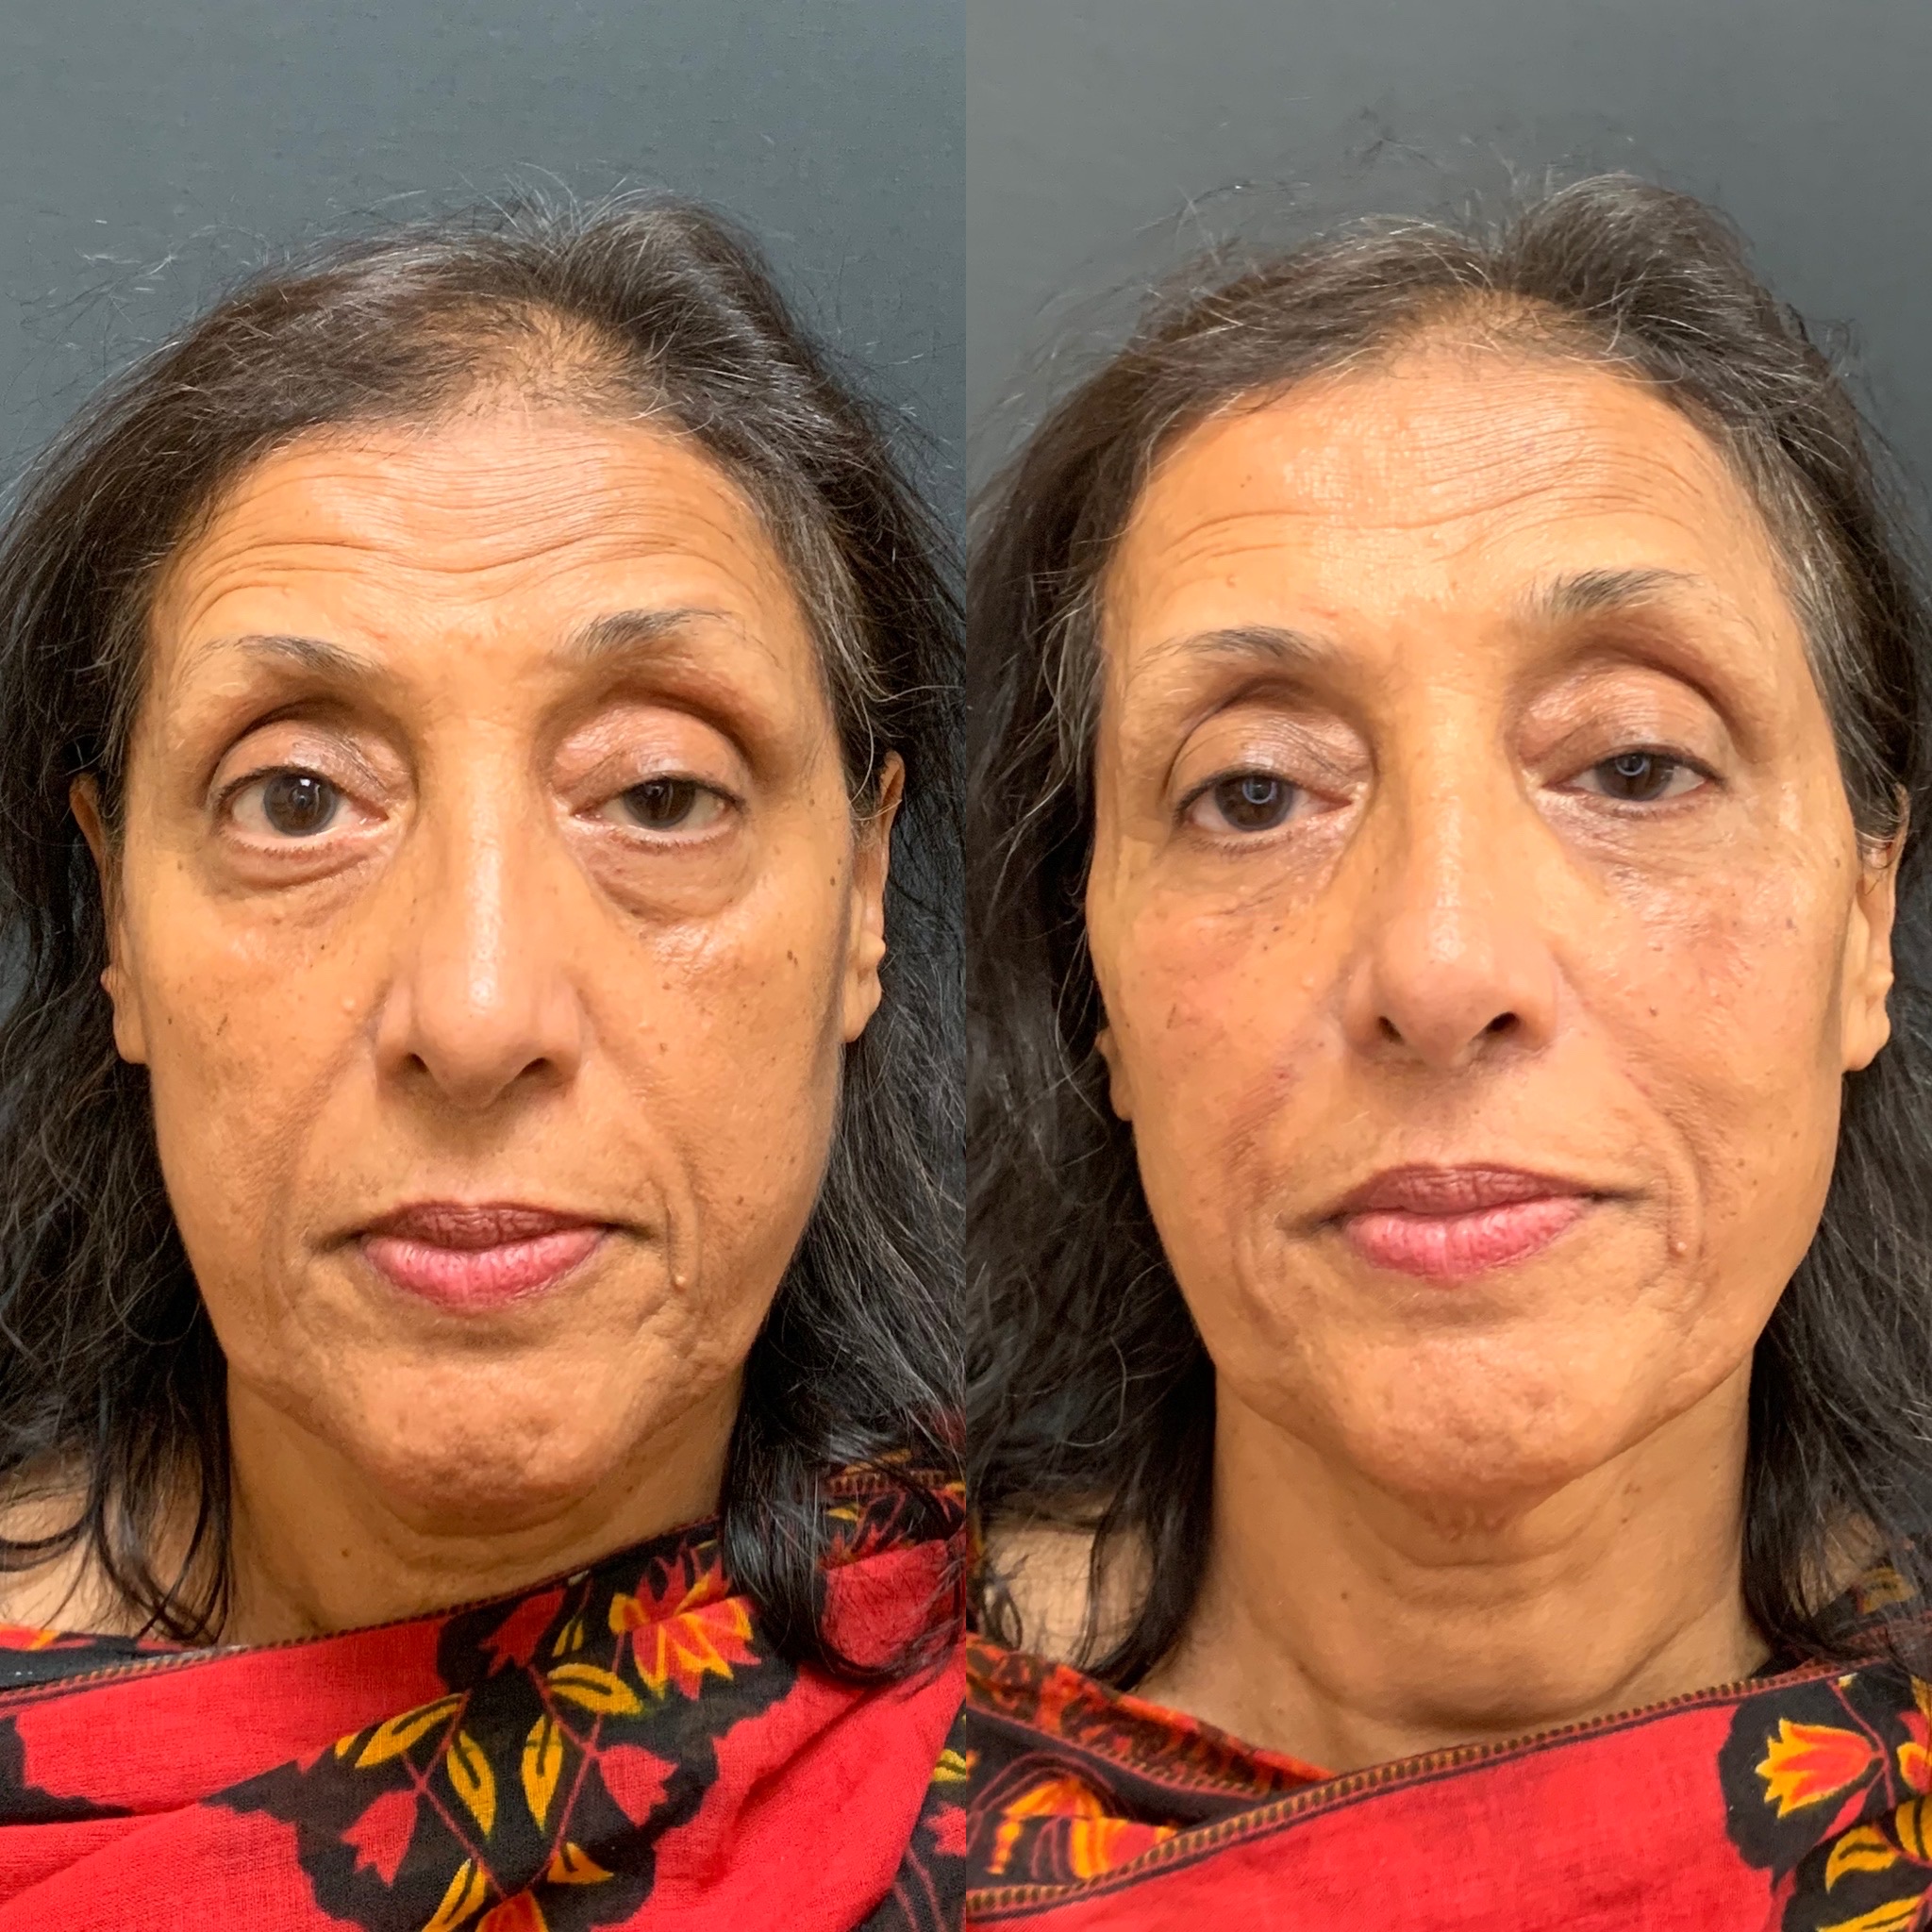 Before and After Panfacial Treatment | Beauty Boost Med Spa in Newport Beach, CA